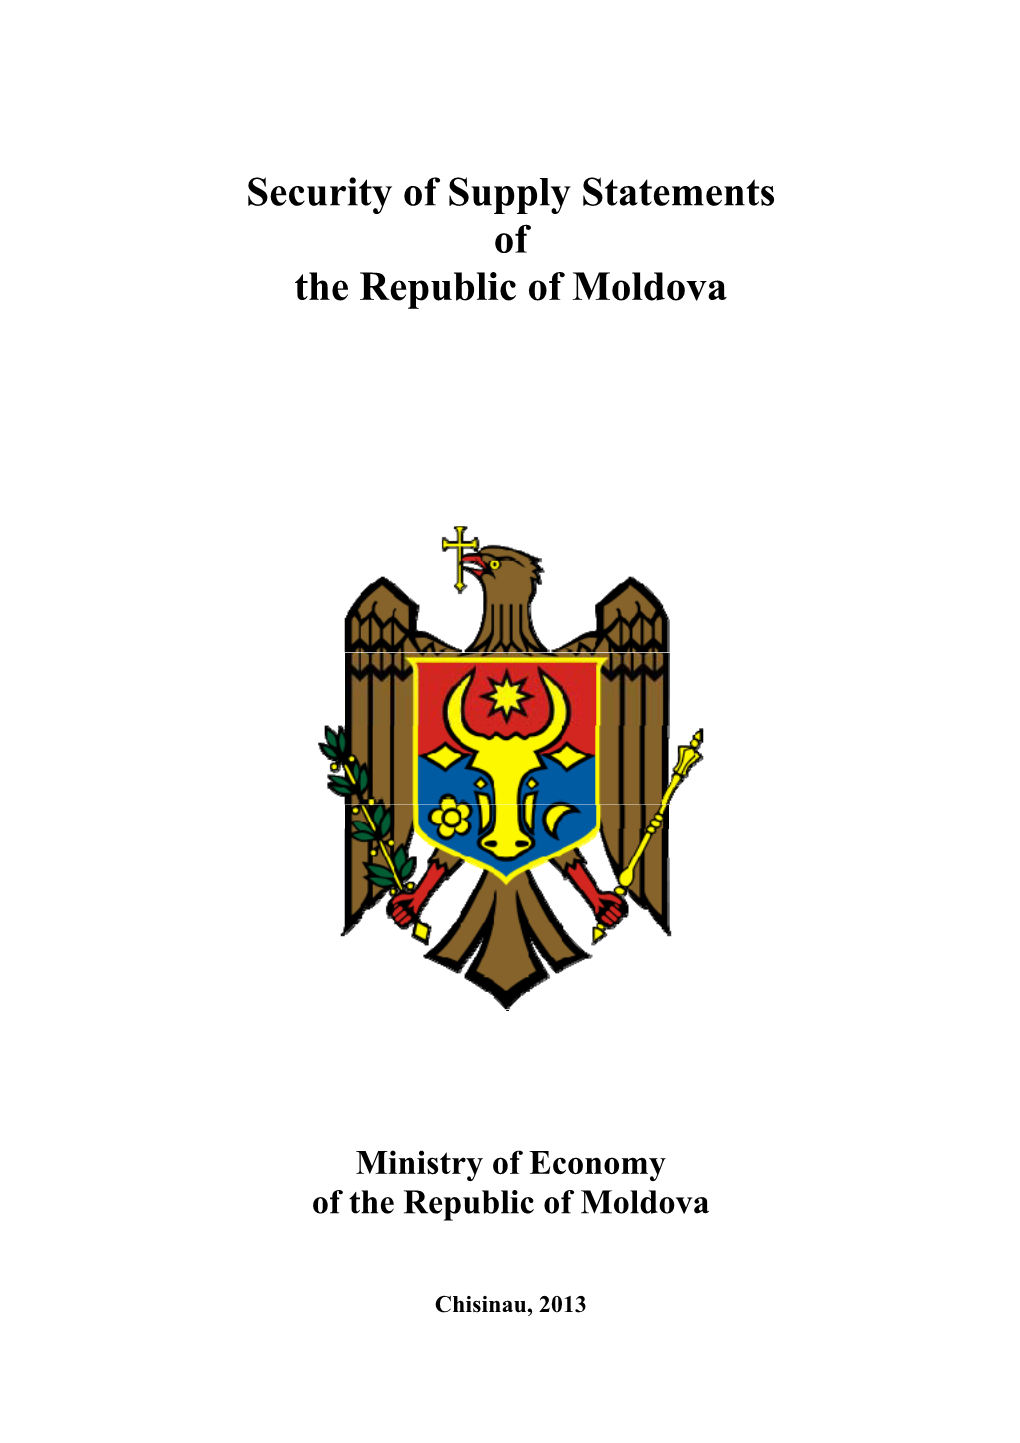 Security of Supply Statements of the Republic of Moldova